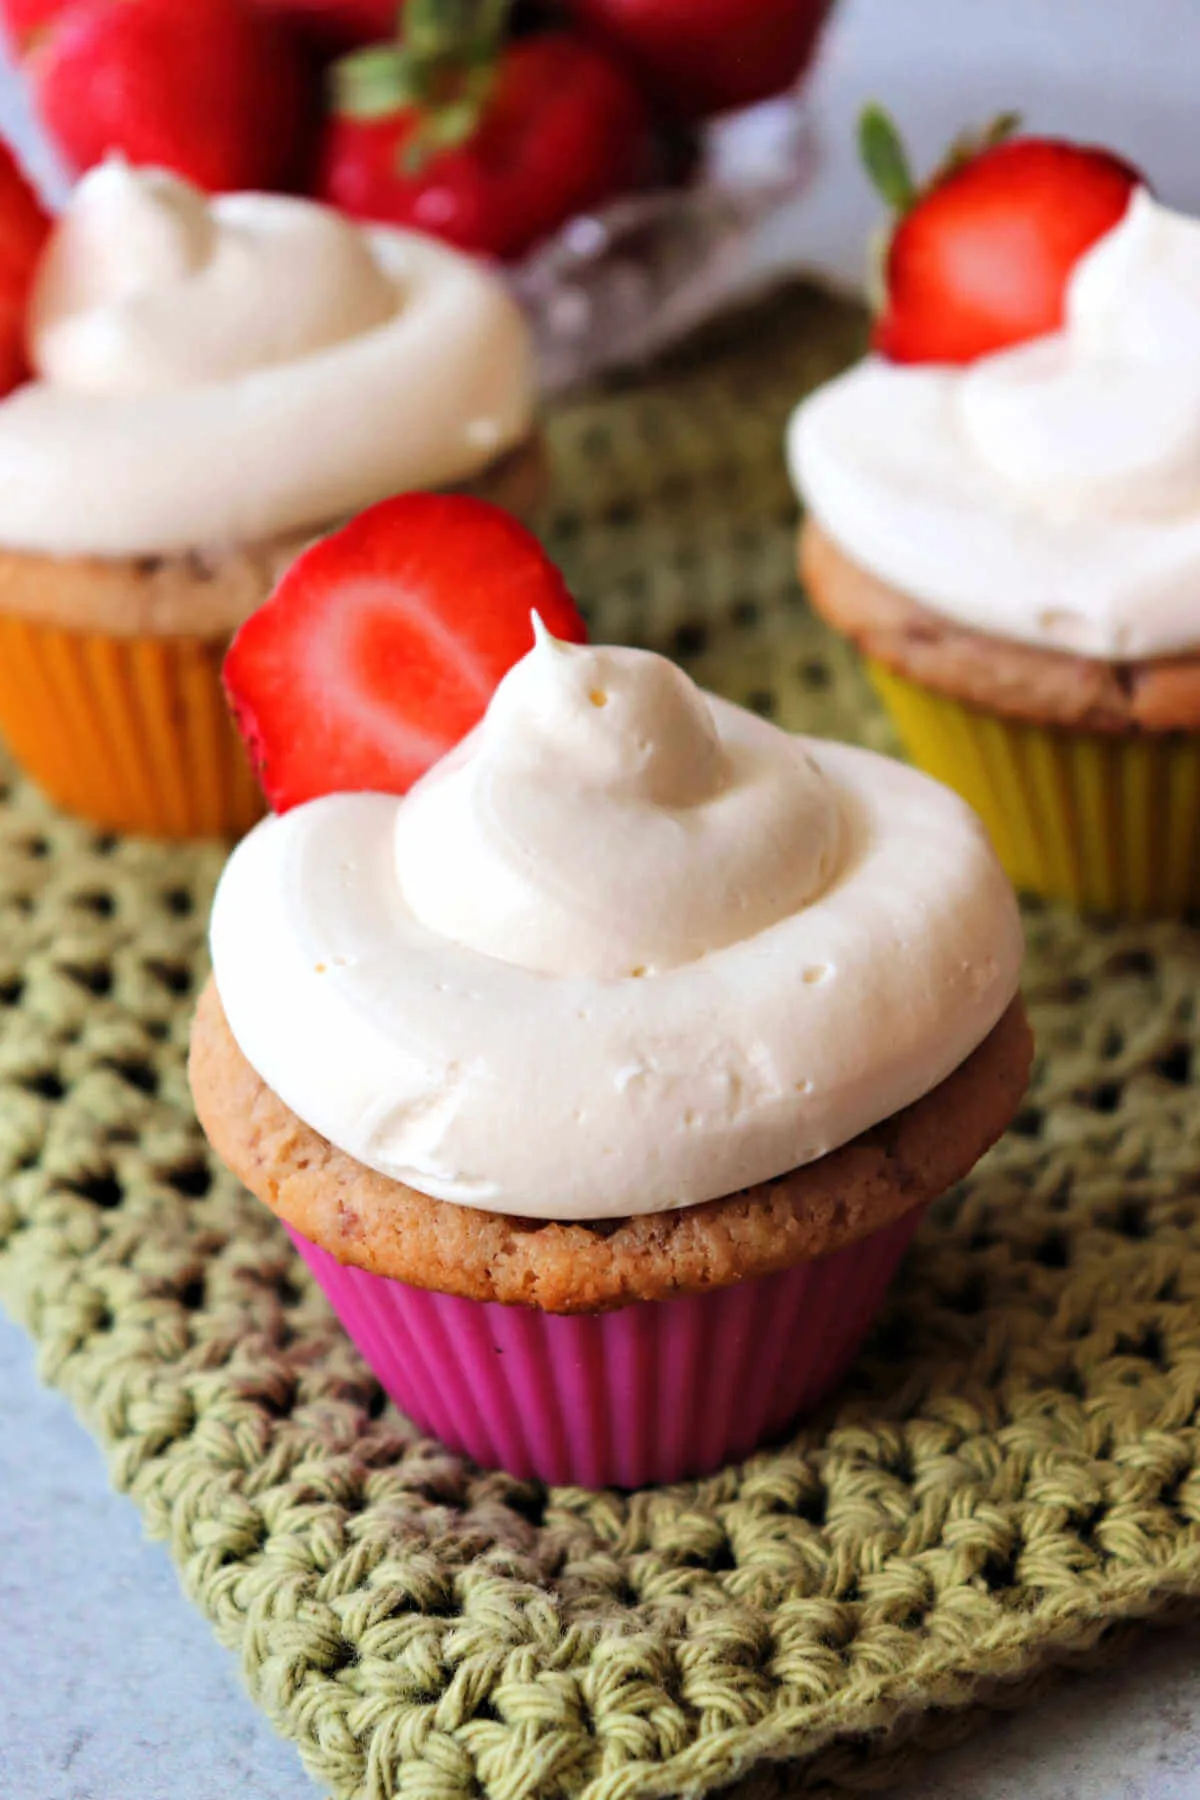 Keto strawberry cupcakes topped with sugar-free cream cheese frosting.